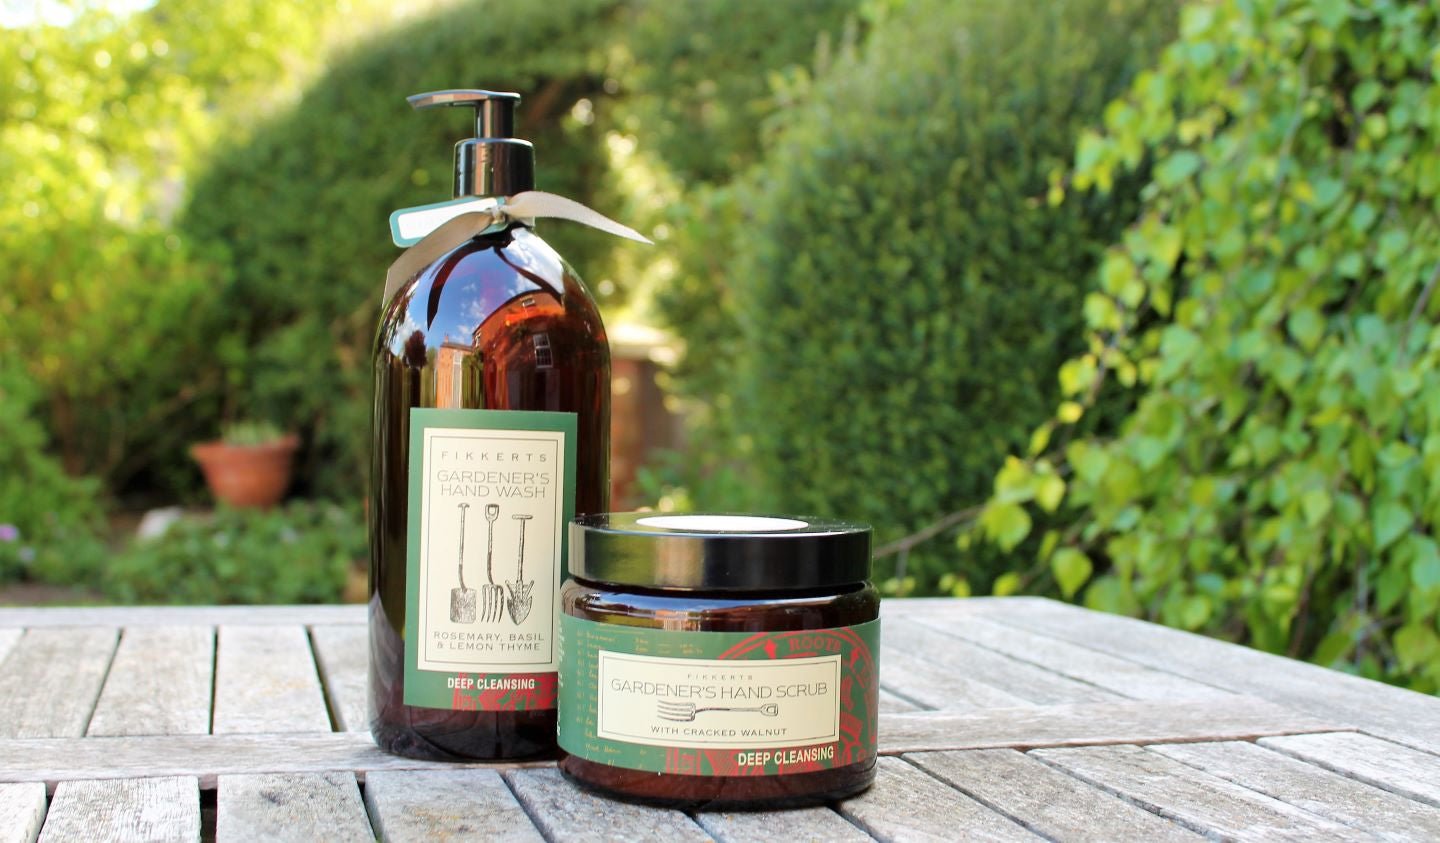 Gifts for Gardeners including luxury hand cream & handwash from Fikkerts Kitchen Garden and RHS Botanic Gardens at Kew.